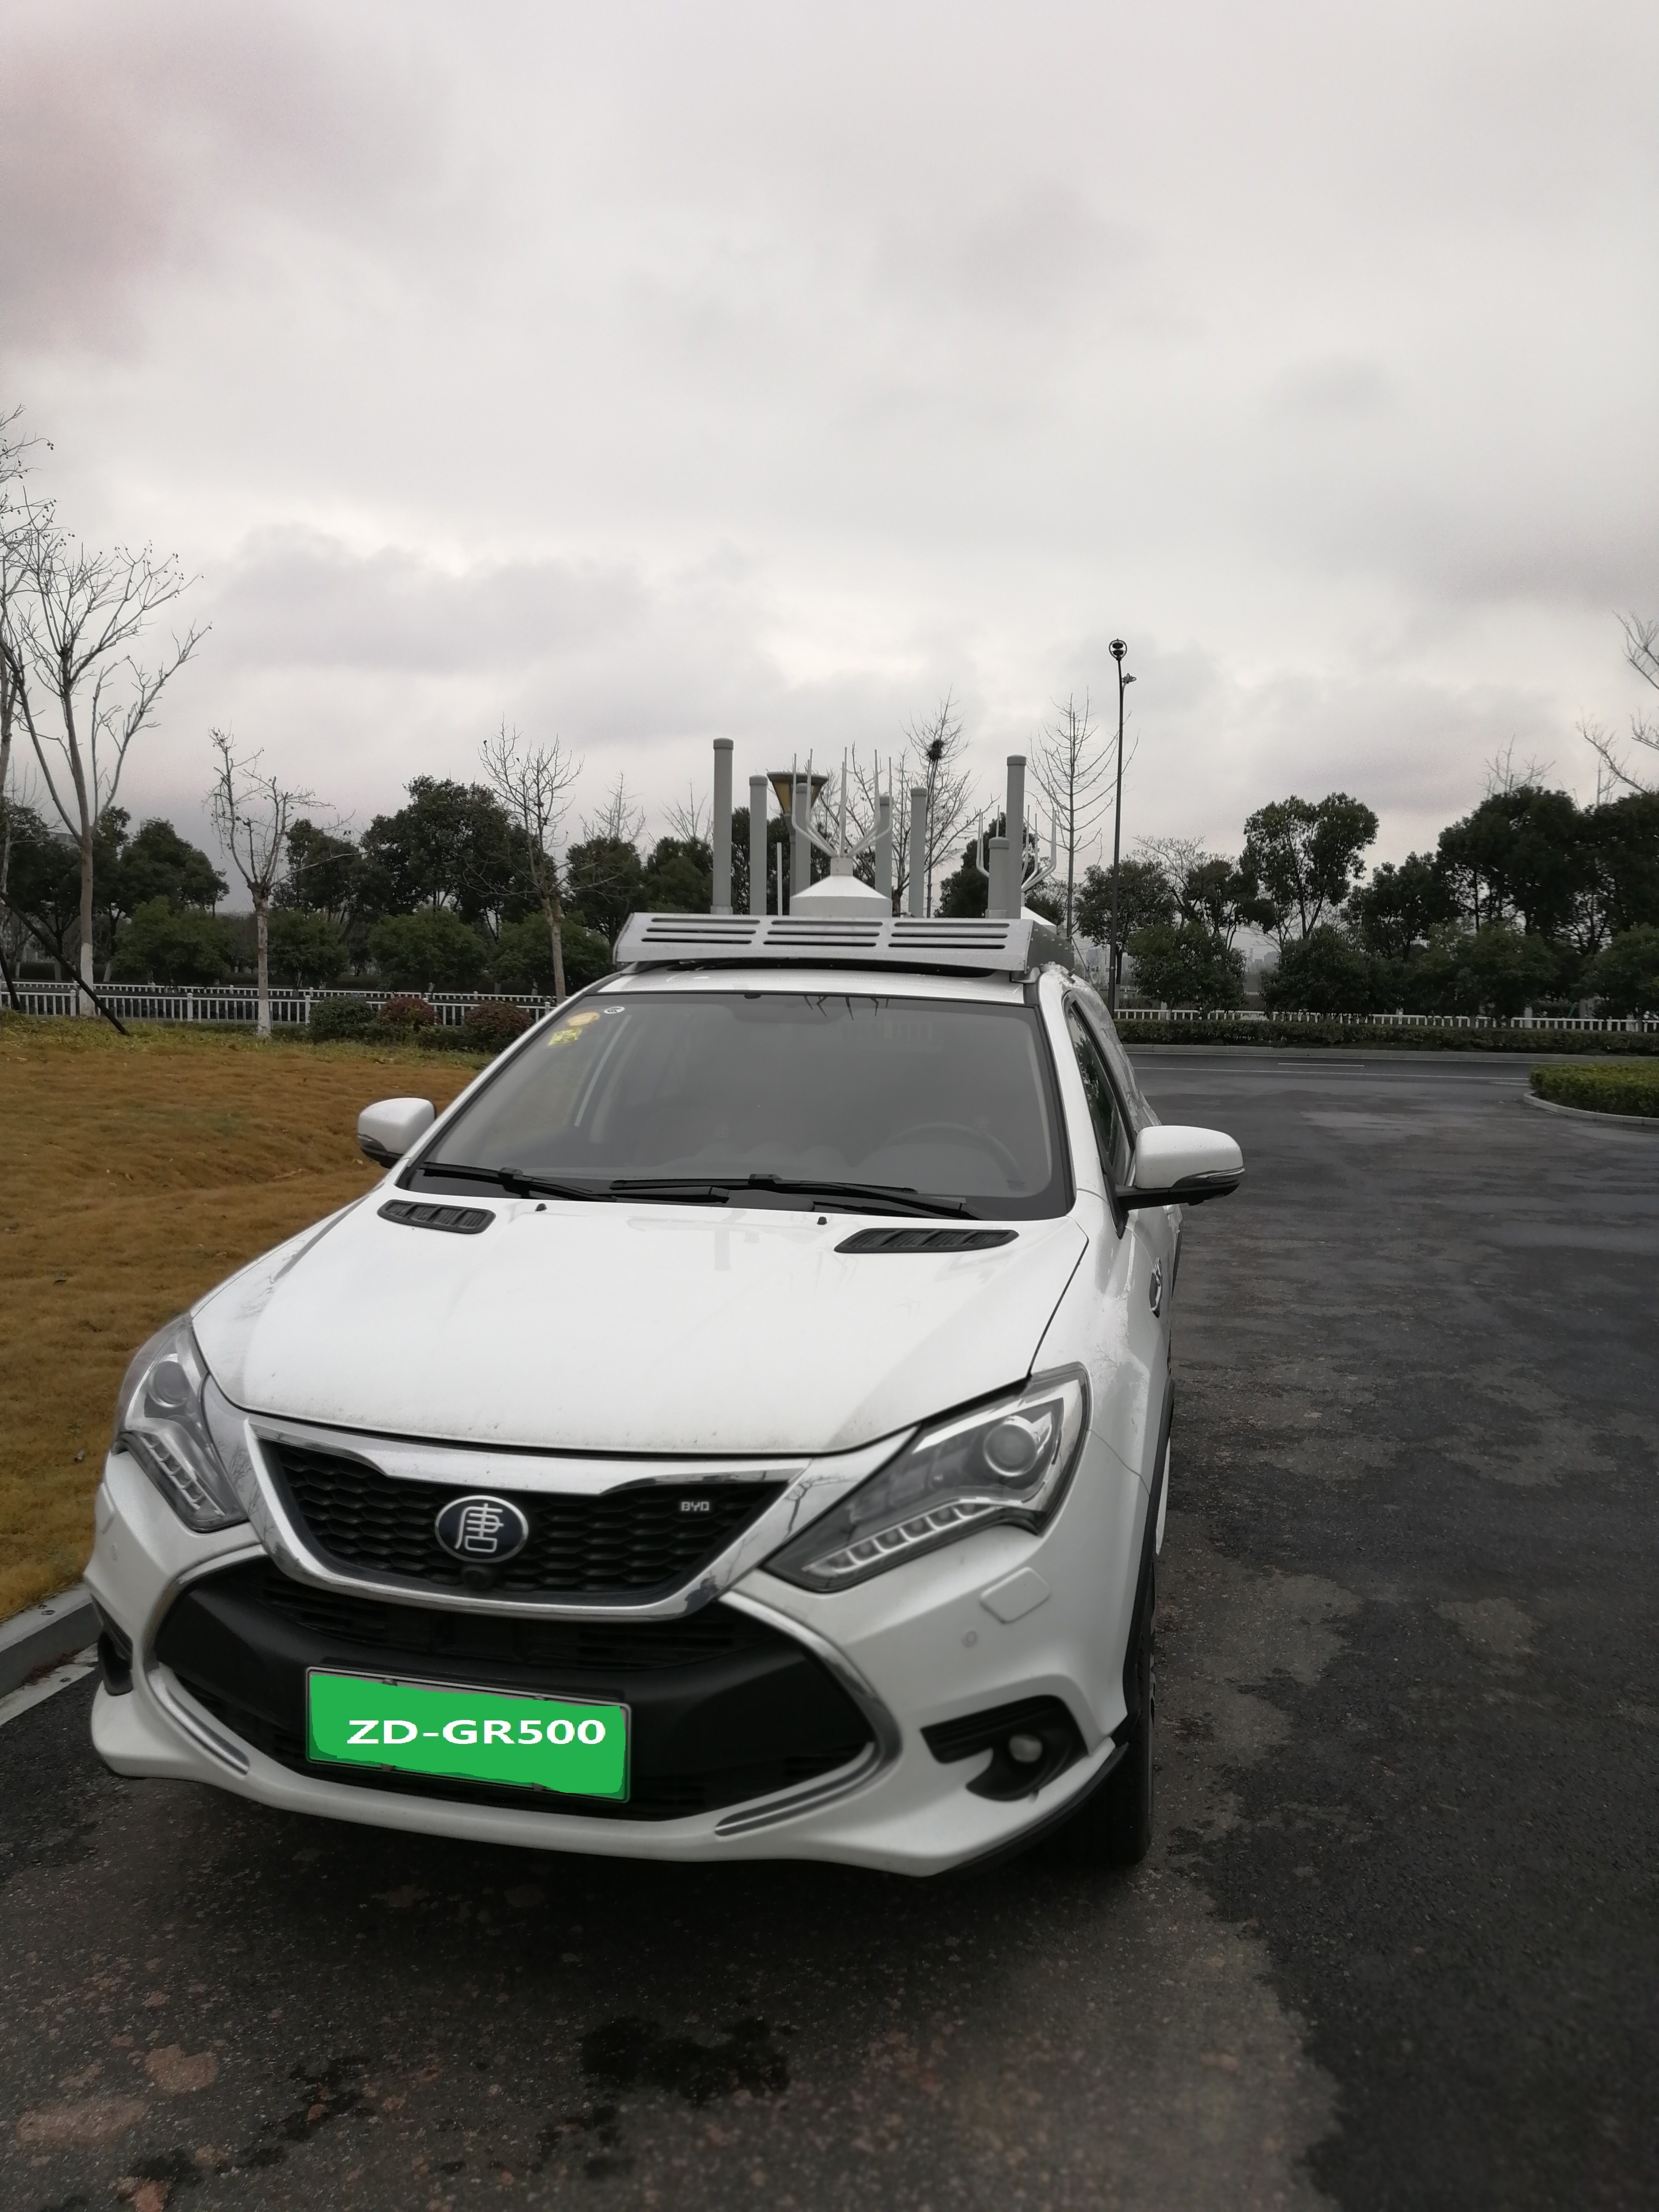 AC220V Vehicle Mounted Jammer For Jamming 20-6000 MHz Wireless Communication